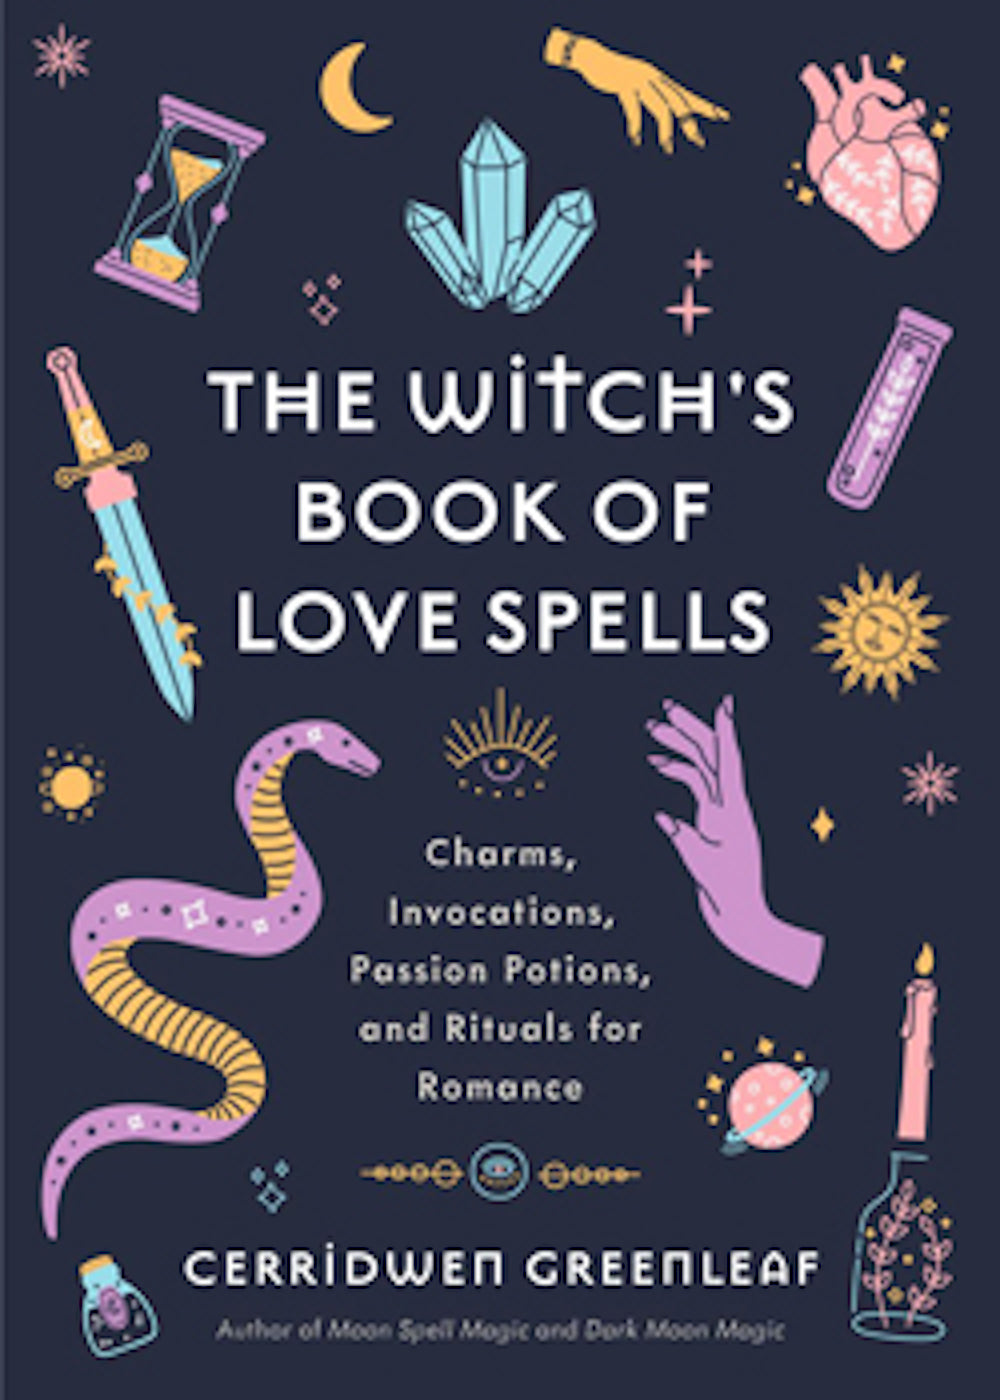 The Witch's Book of Love Spells